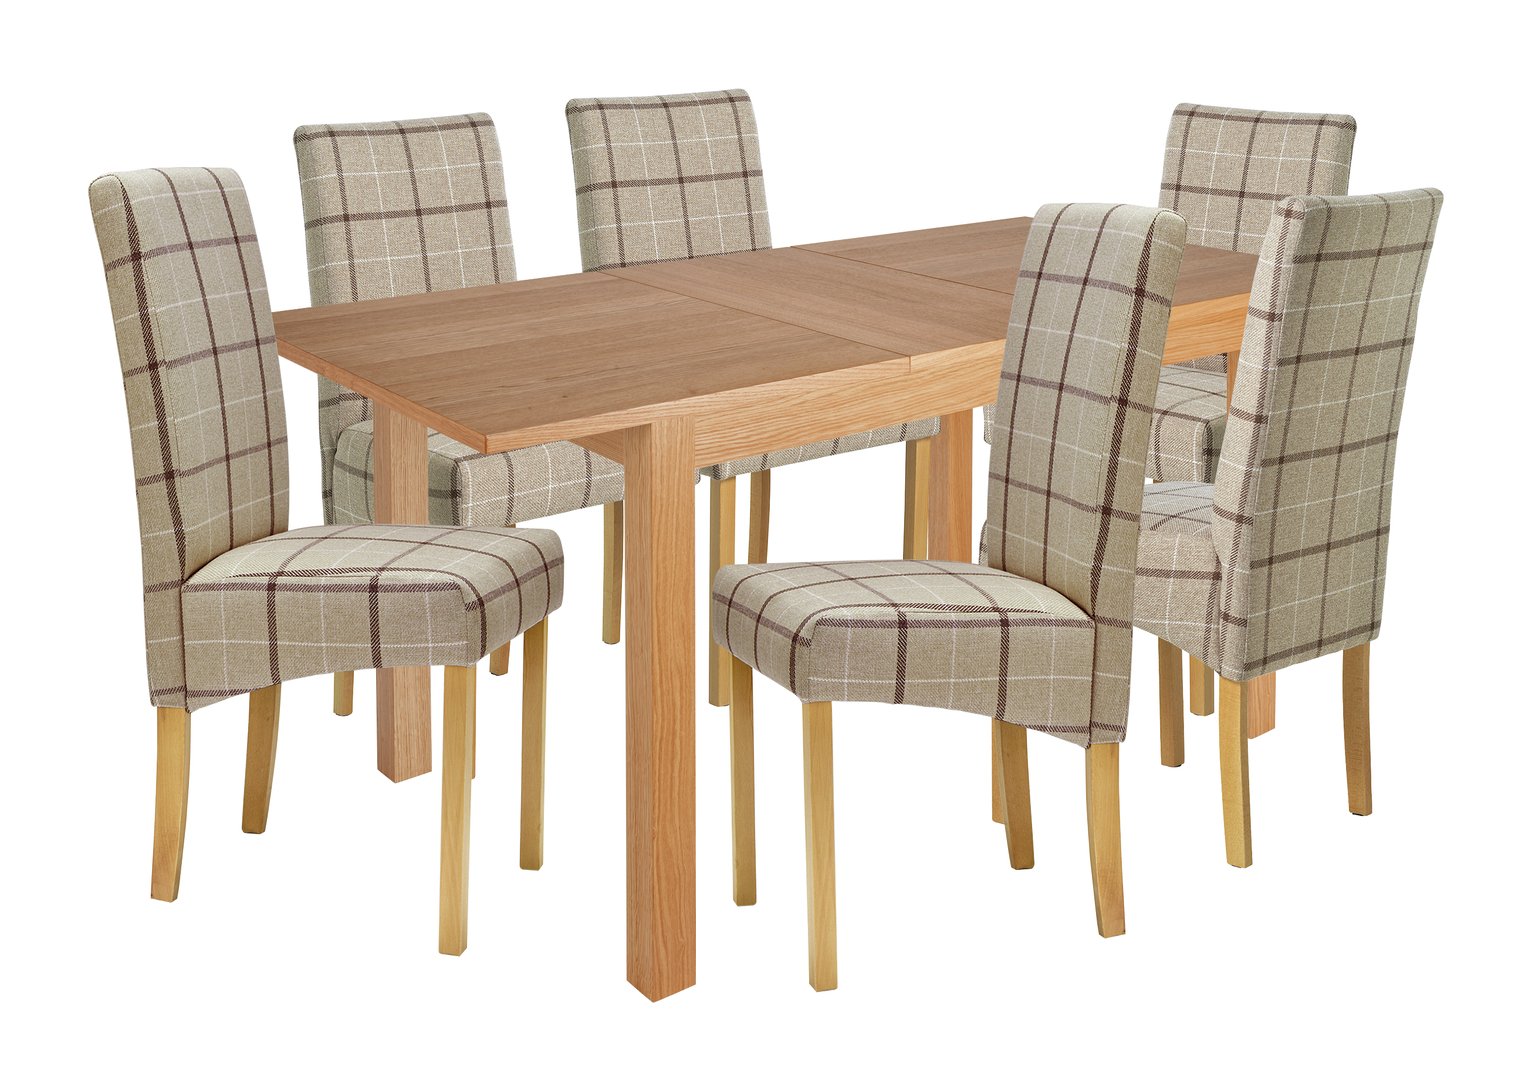 Argos Home Clifton Extendable Table & 6 Chairs Reviews